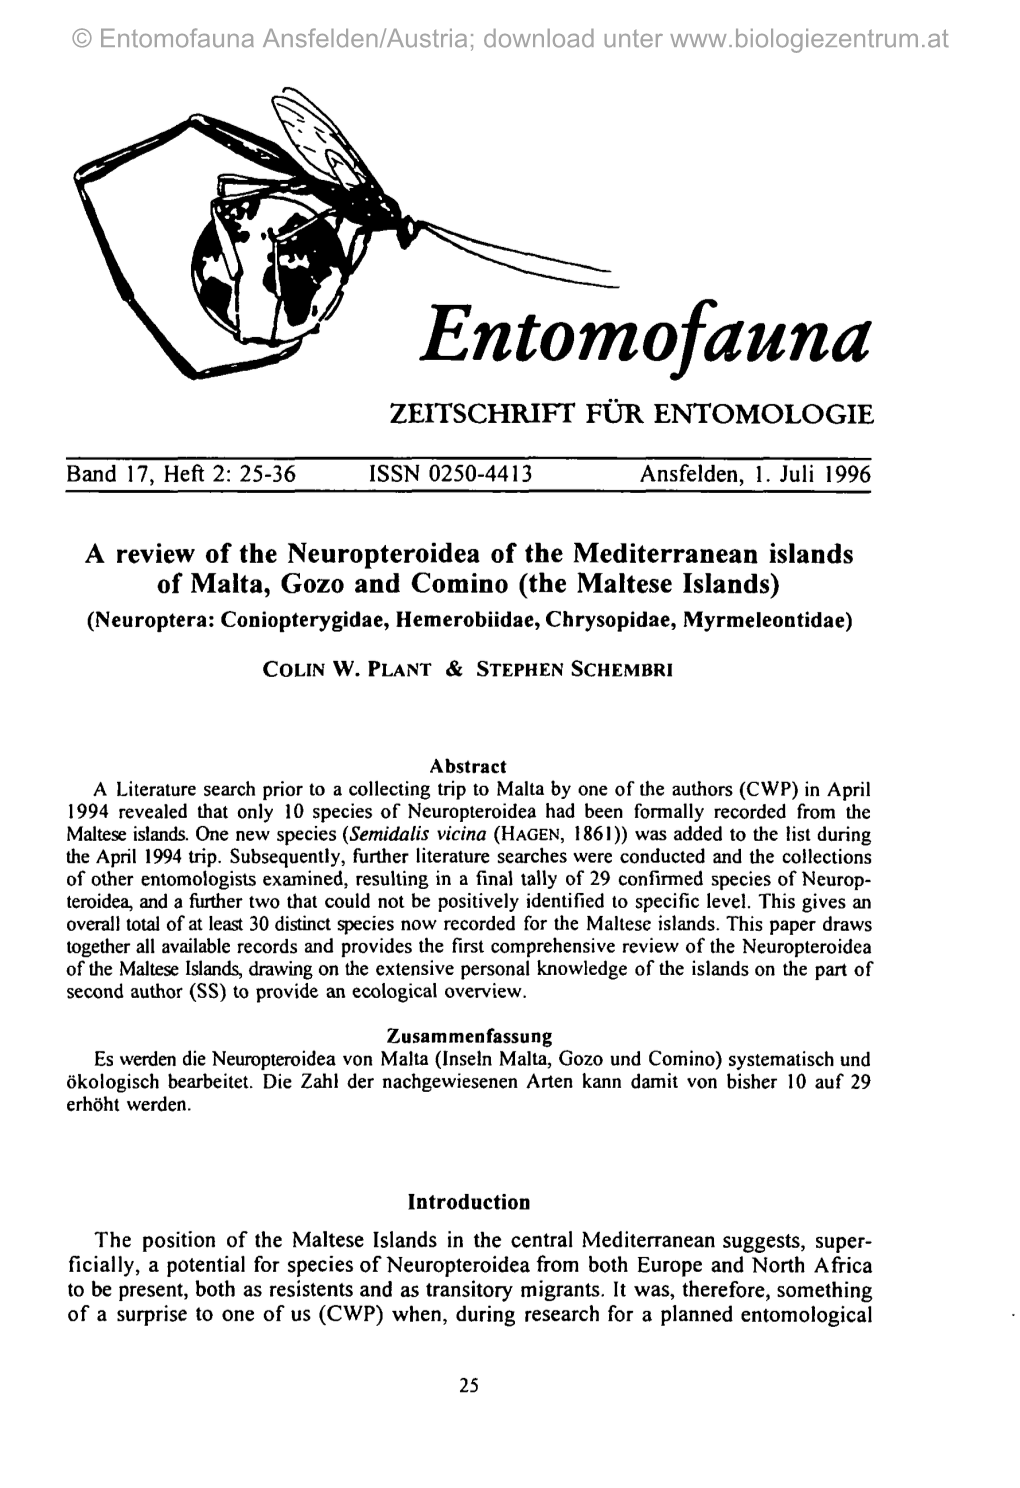 A Review of the Neuropteroidea of the Mediterranean Islands of Malta, Gozo and Comino (The Maltese Islands)